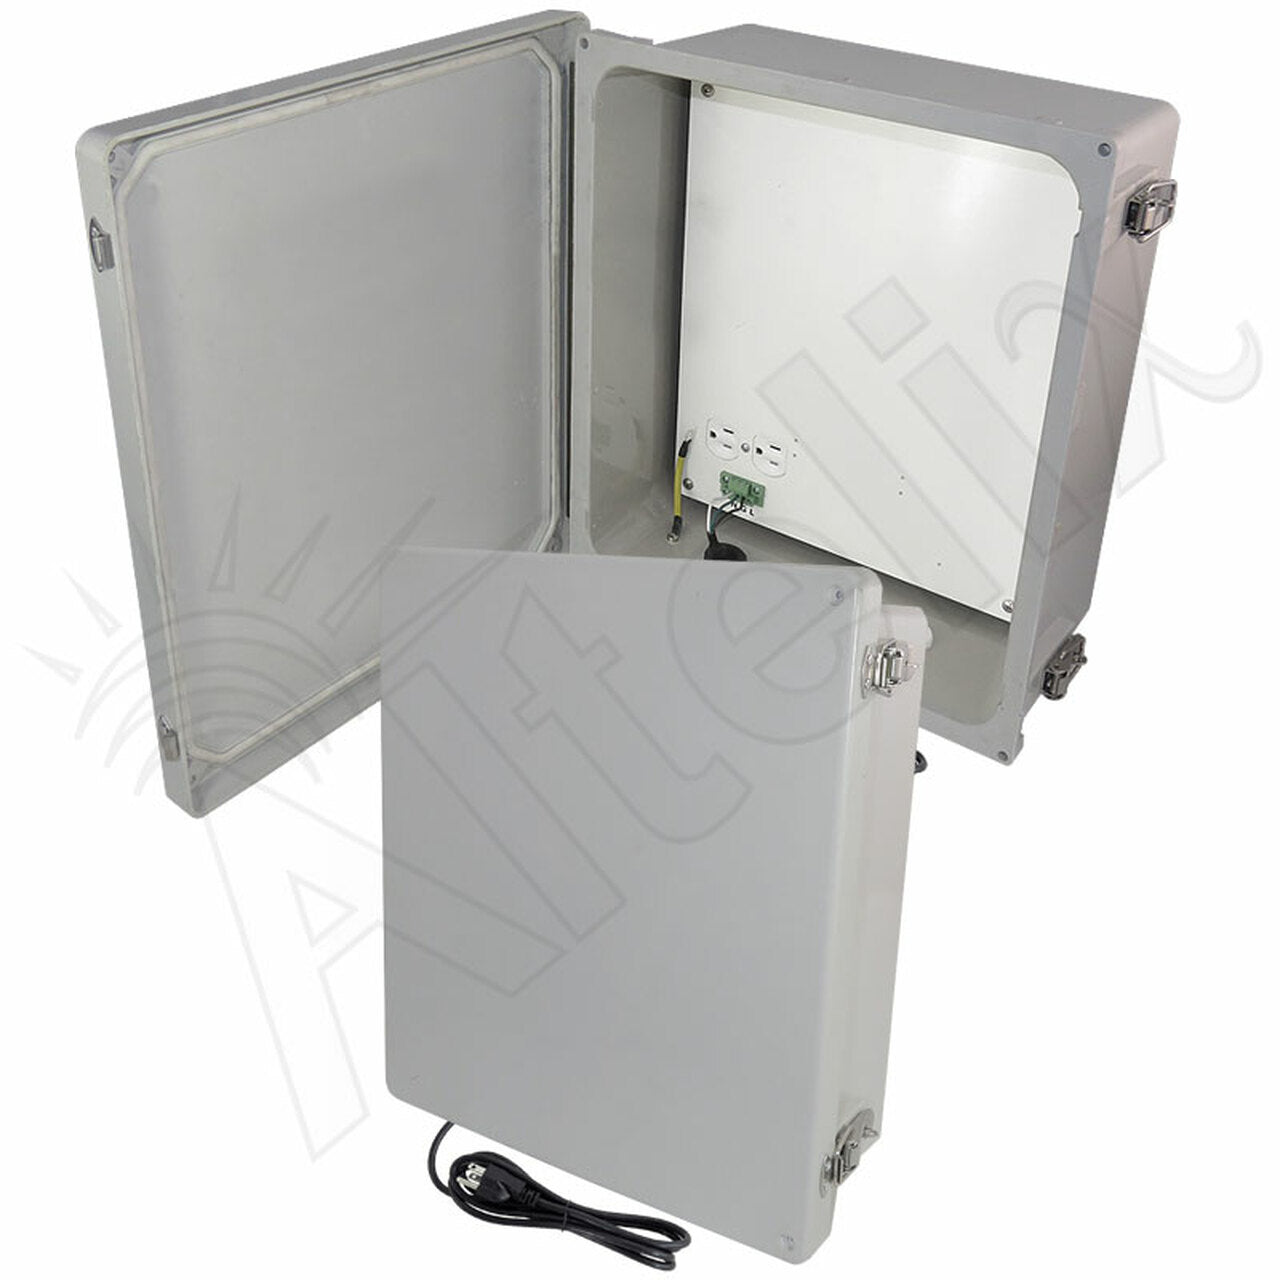 Altelix Fiberglass Weatherproof WiFi NEMA 4X Enclosure with Polyester Mounting Plate, 120 VAC Outlets & Power Cord